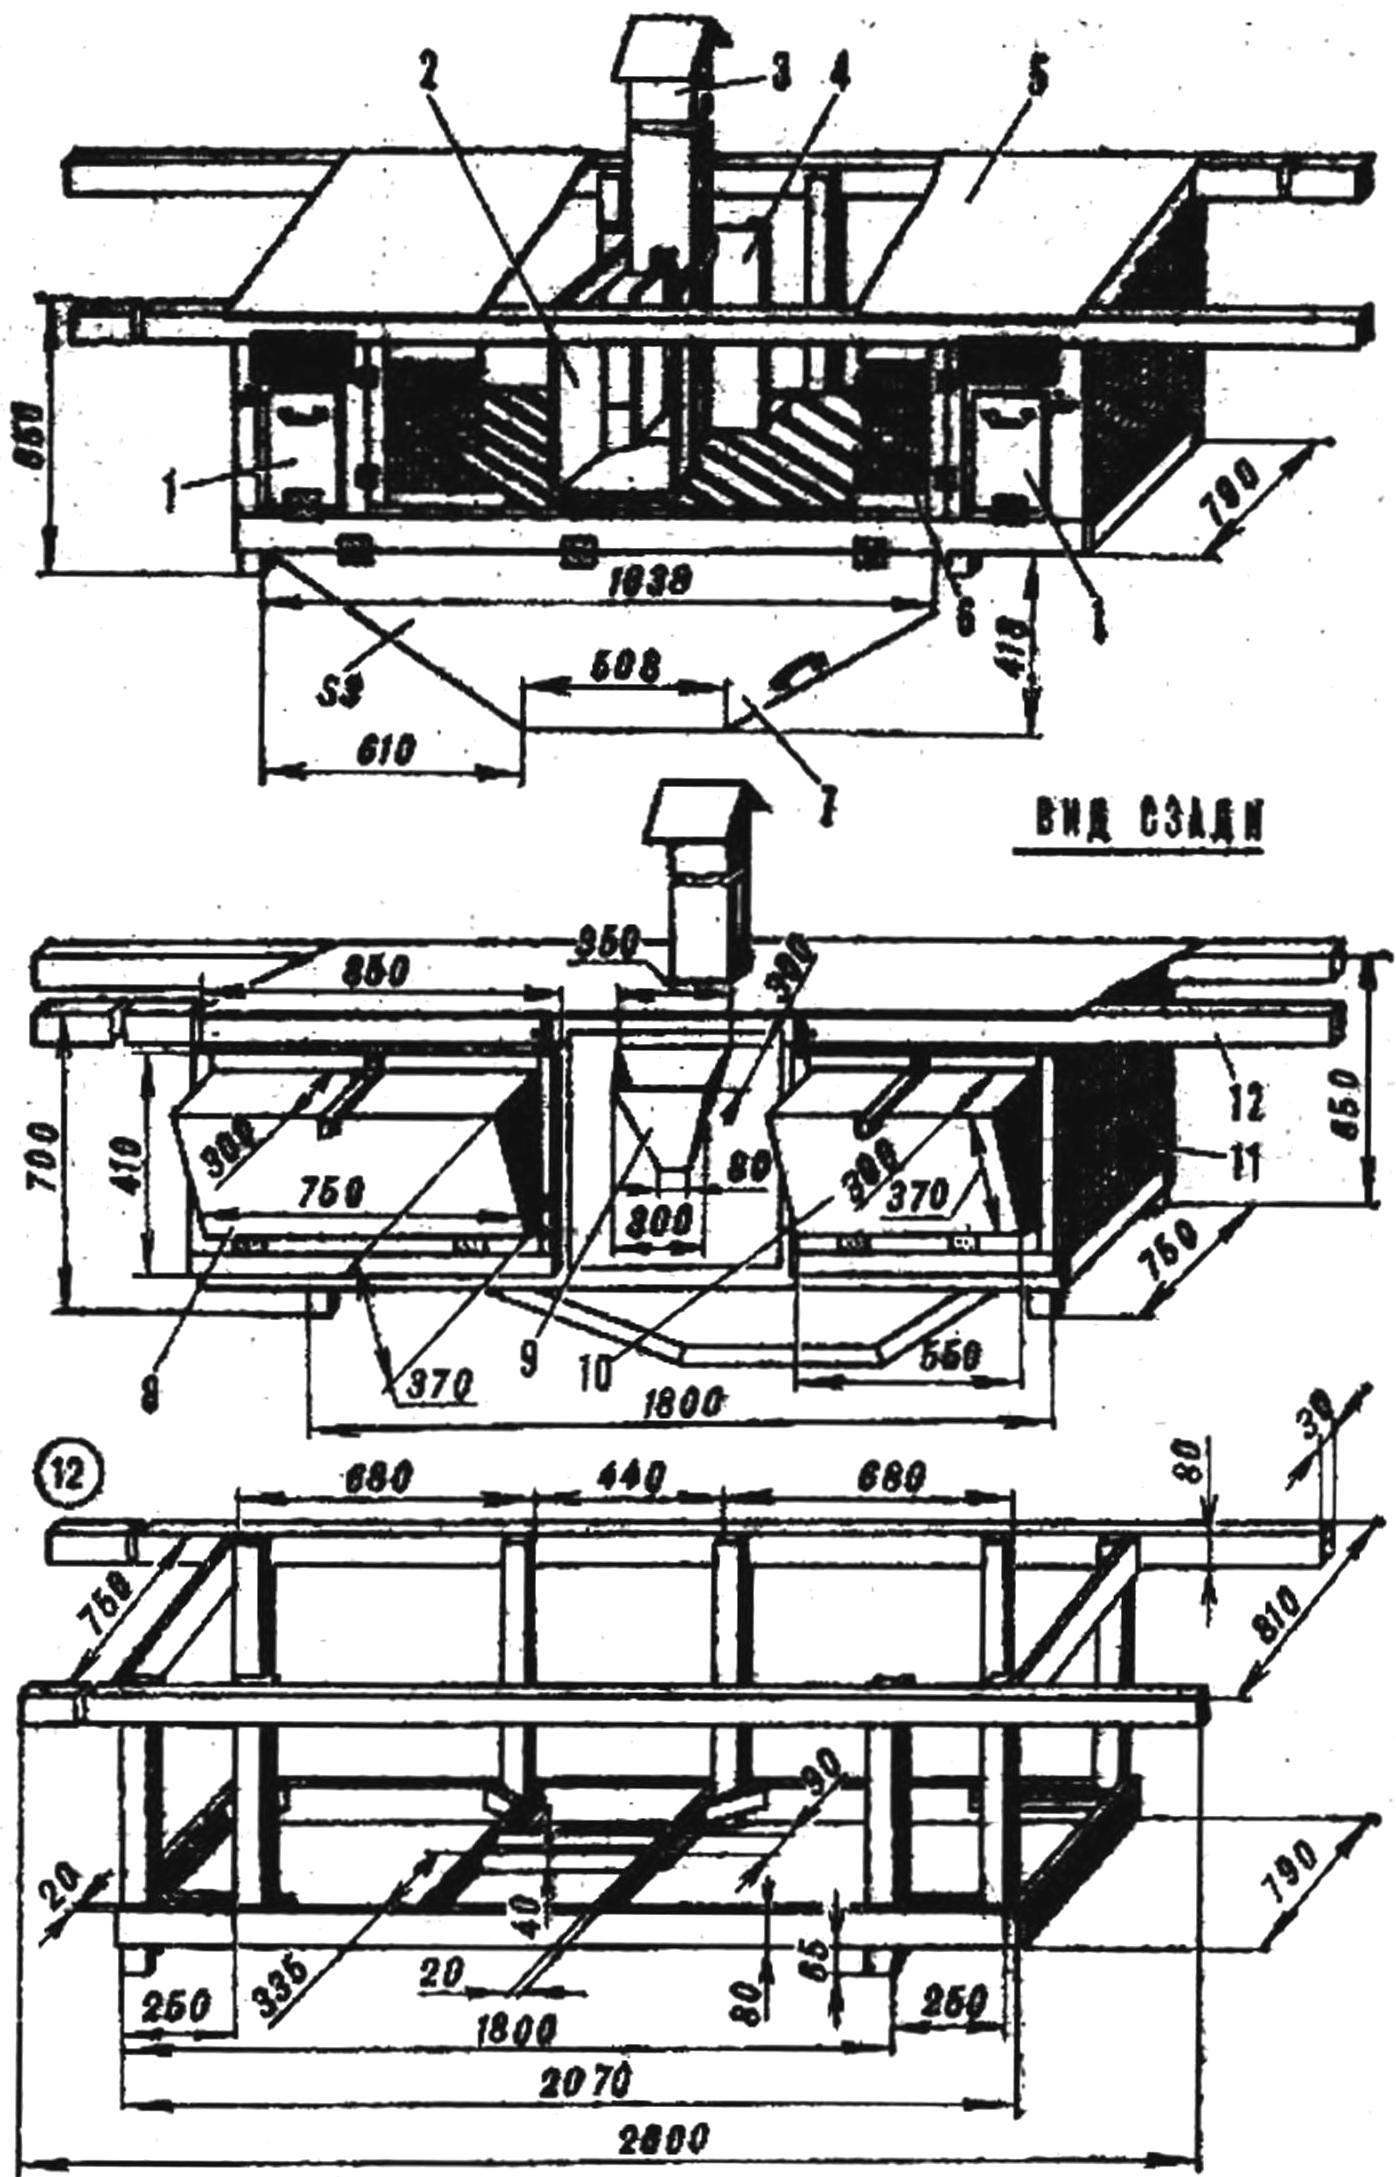 Fig. 5. The upper tier